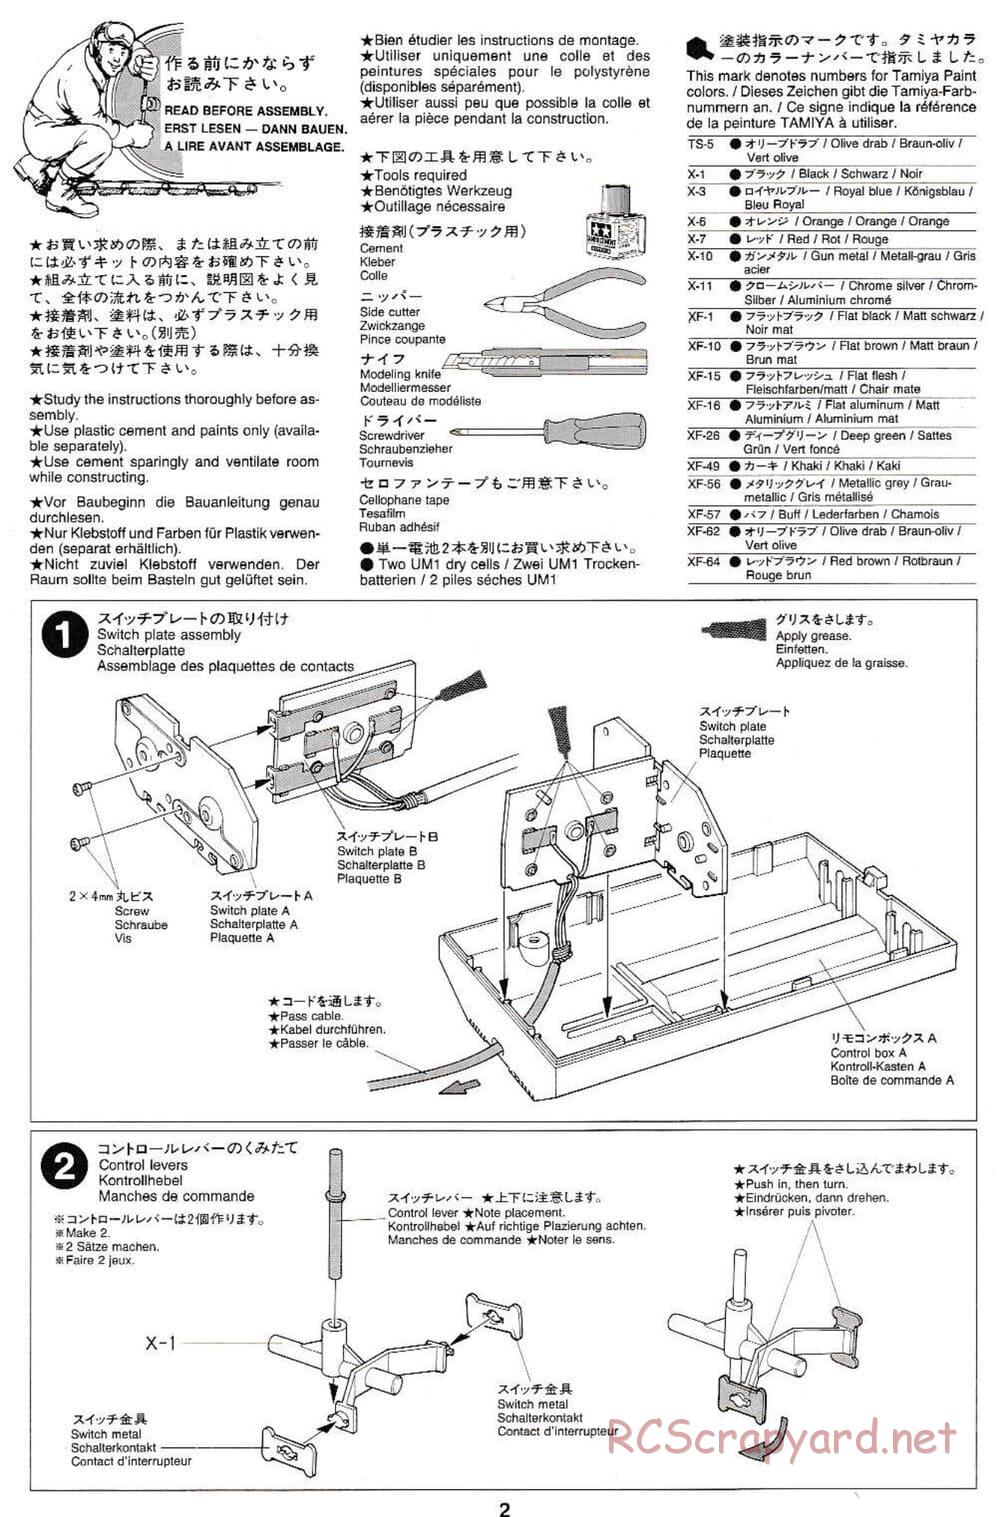 Tamiya - J.G.S.D.F. Type 74 - 1/35 Scale Chassis - Manual - Page 2